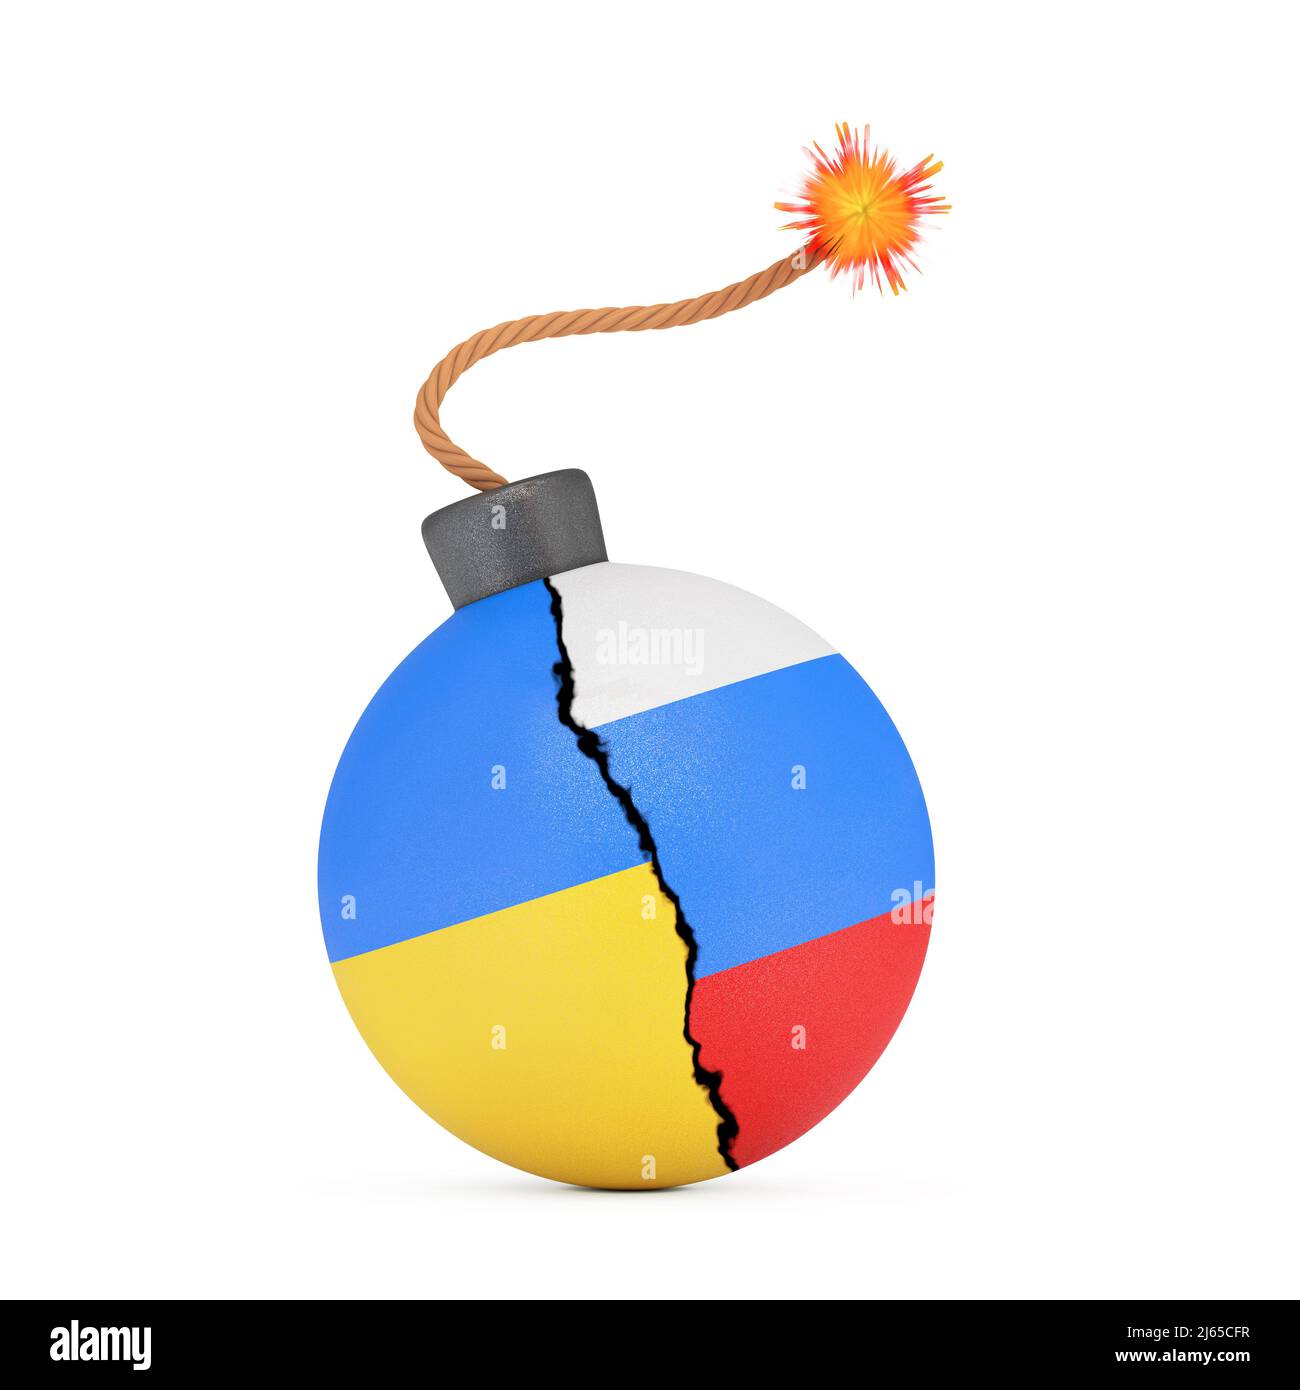 Russan and Ukraine Conflict oncept. Russia and Ukraine Flag on Bomb with Wick on a white background. 3d Rendering Stock Photo